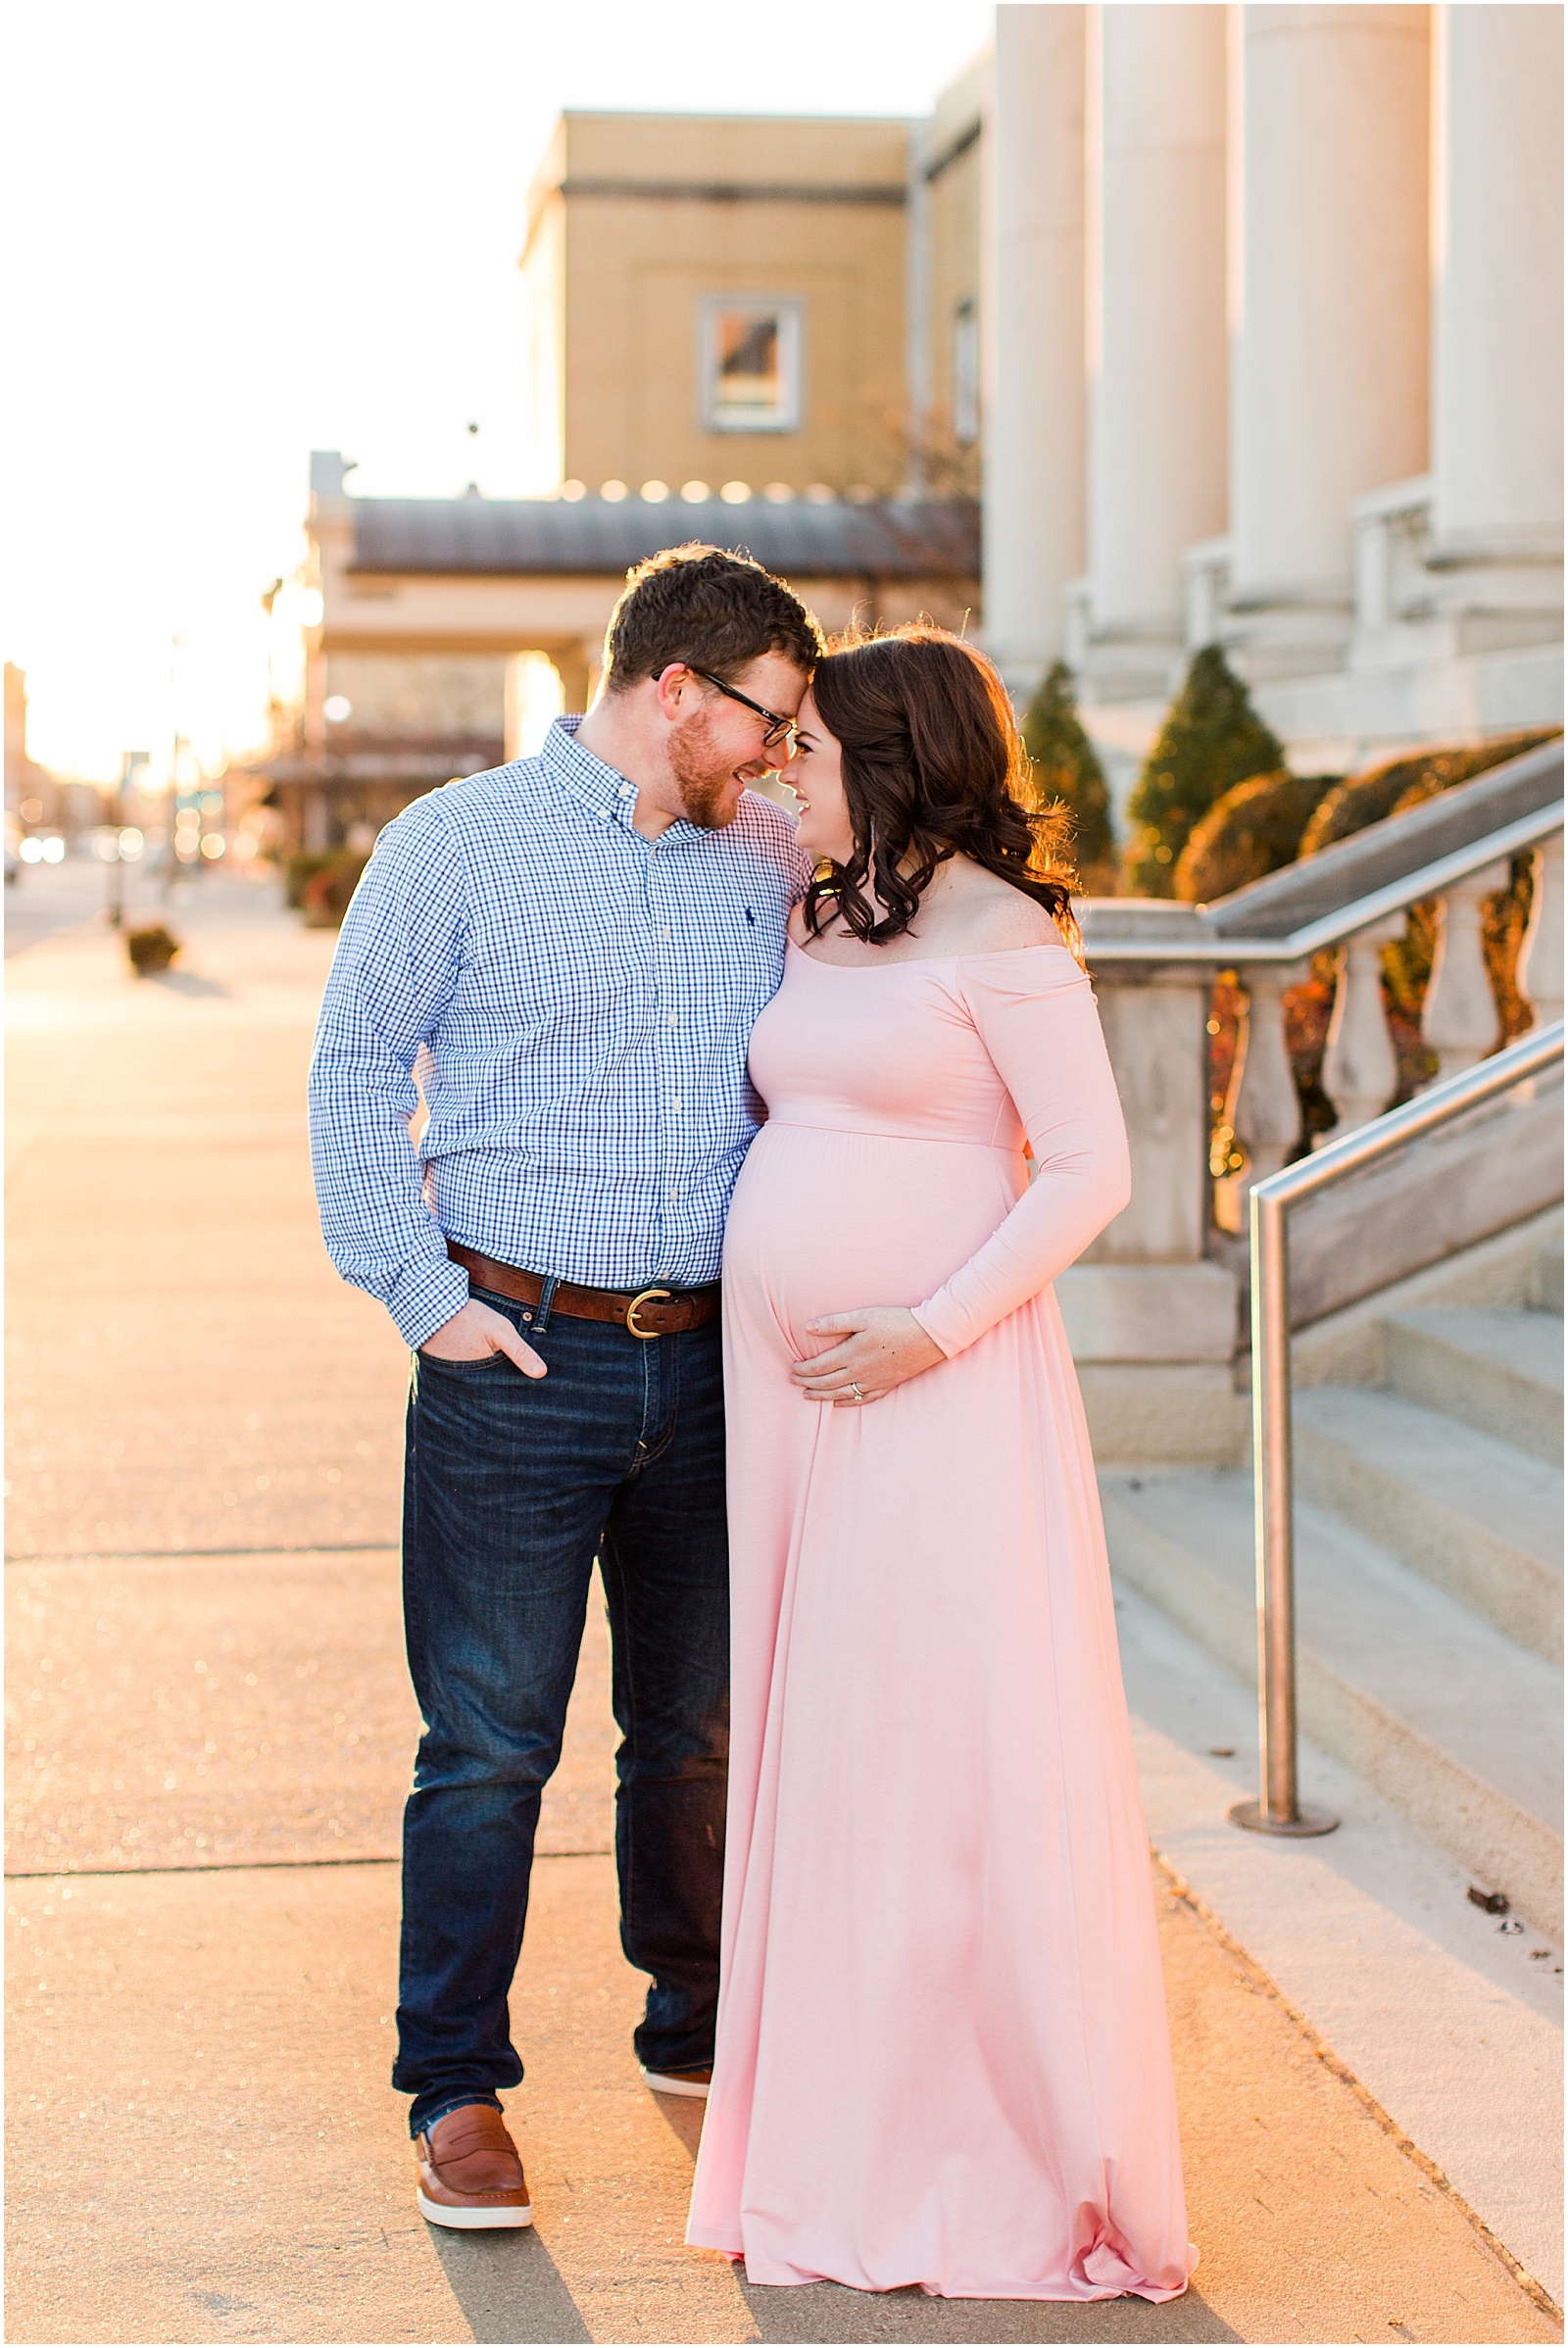 A Downtown Owensboro Maternity Session | Kayla and Grant Evansville Indiana Wedding Photographers-0003.jpg